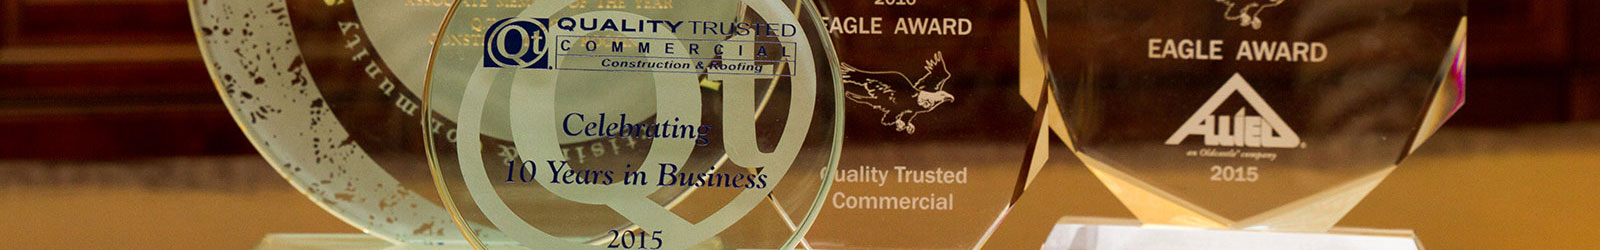 QT Commercial Certificates & Accreditations Banner Image